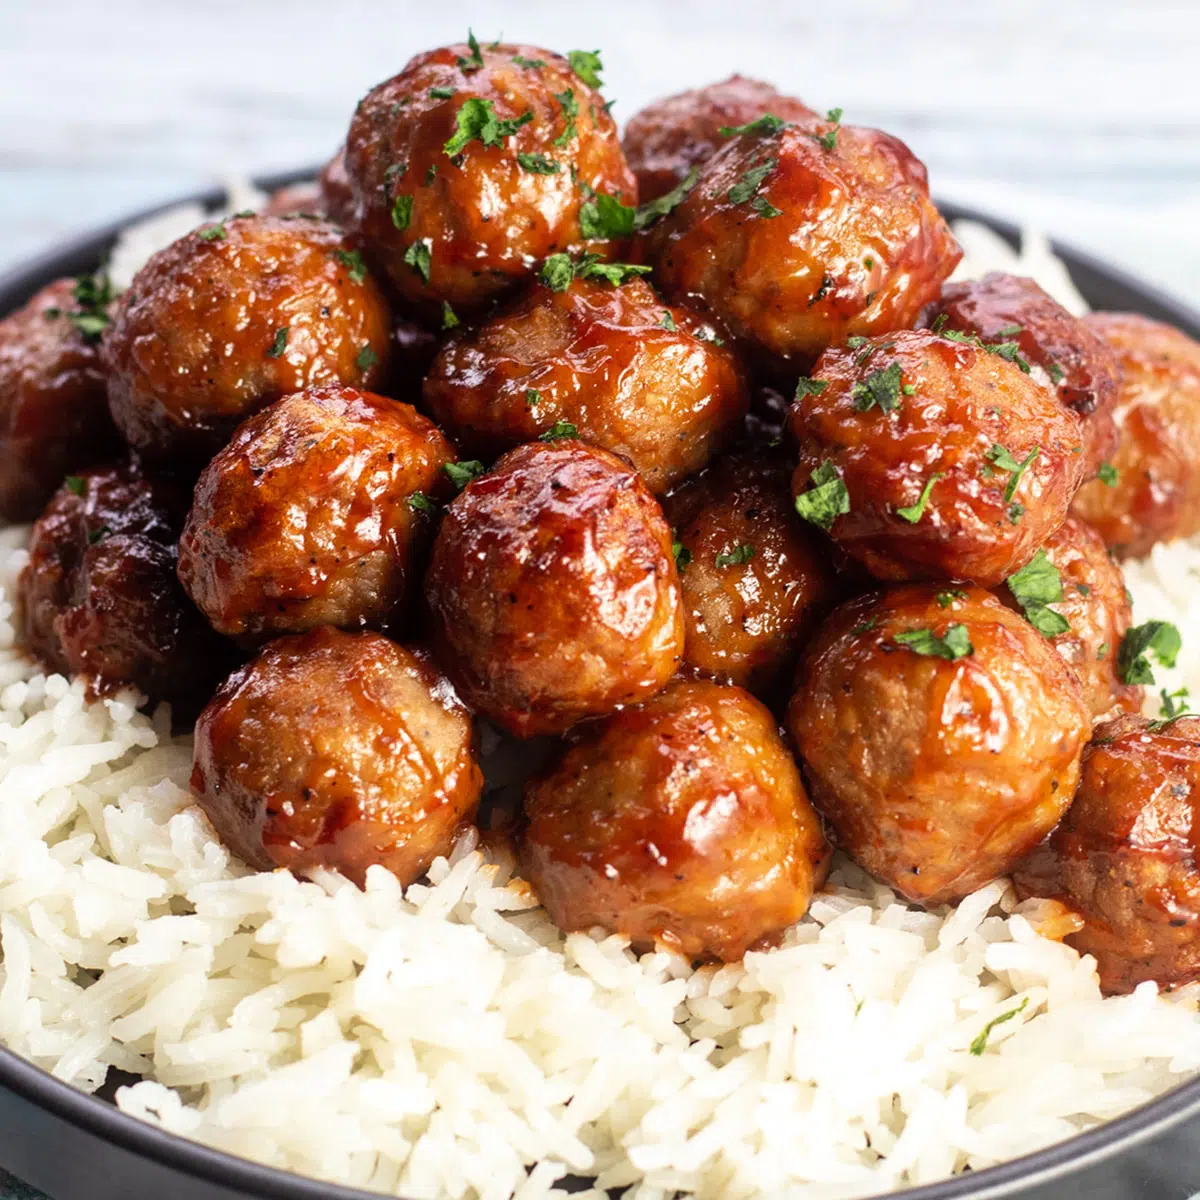 What to serve with meatballs, square image of meatballs over rice on a plate.